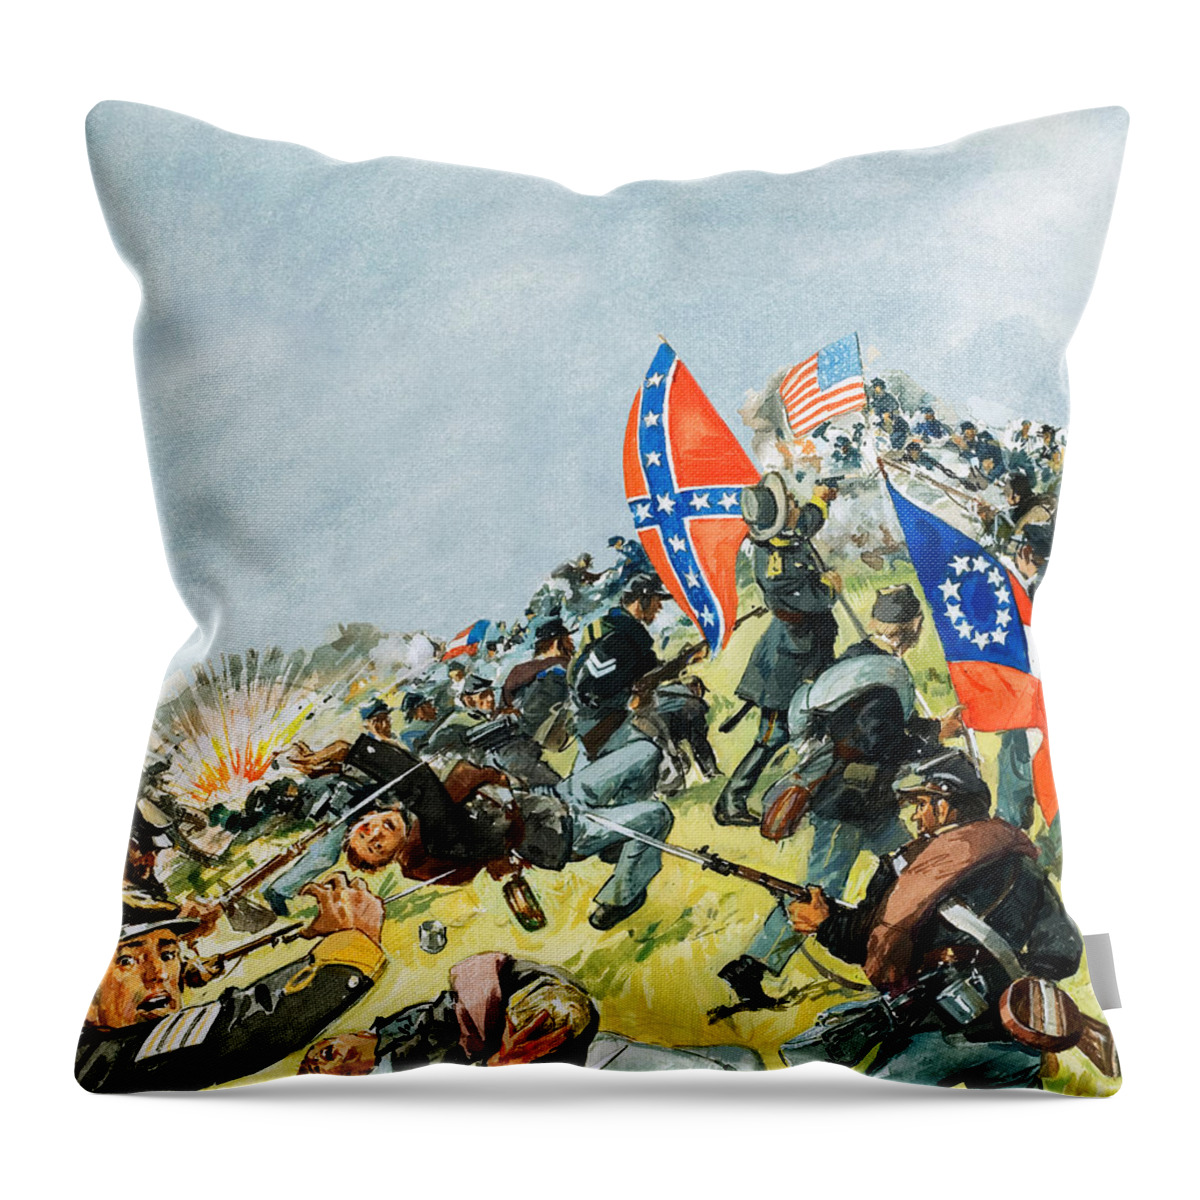 Gettysburg Throw Pillow featuring the painting The Battlefield at Gettysburg by Leo Davy